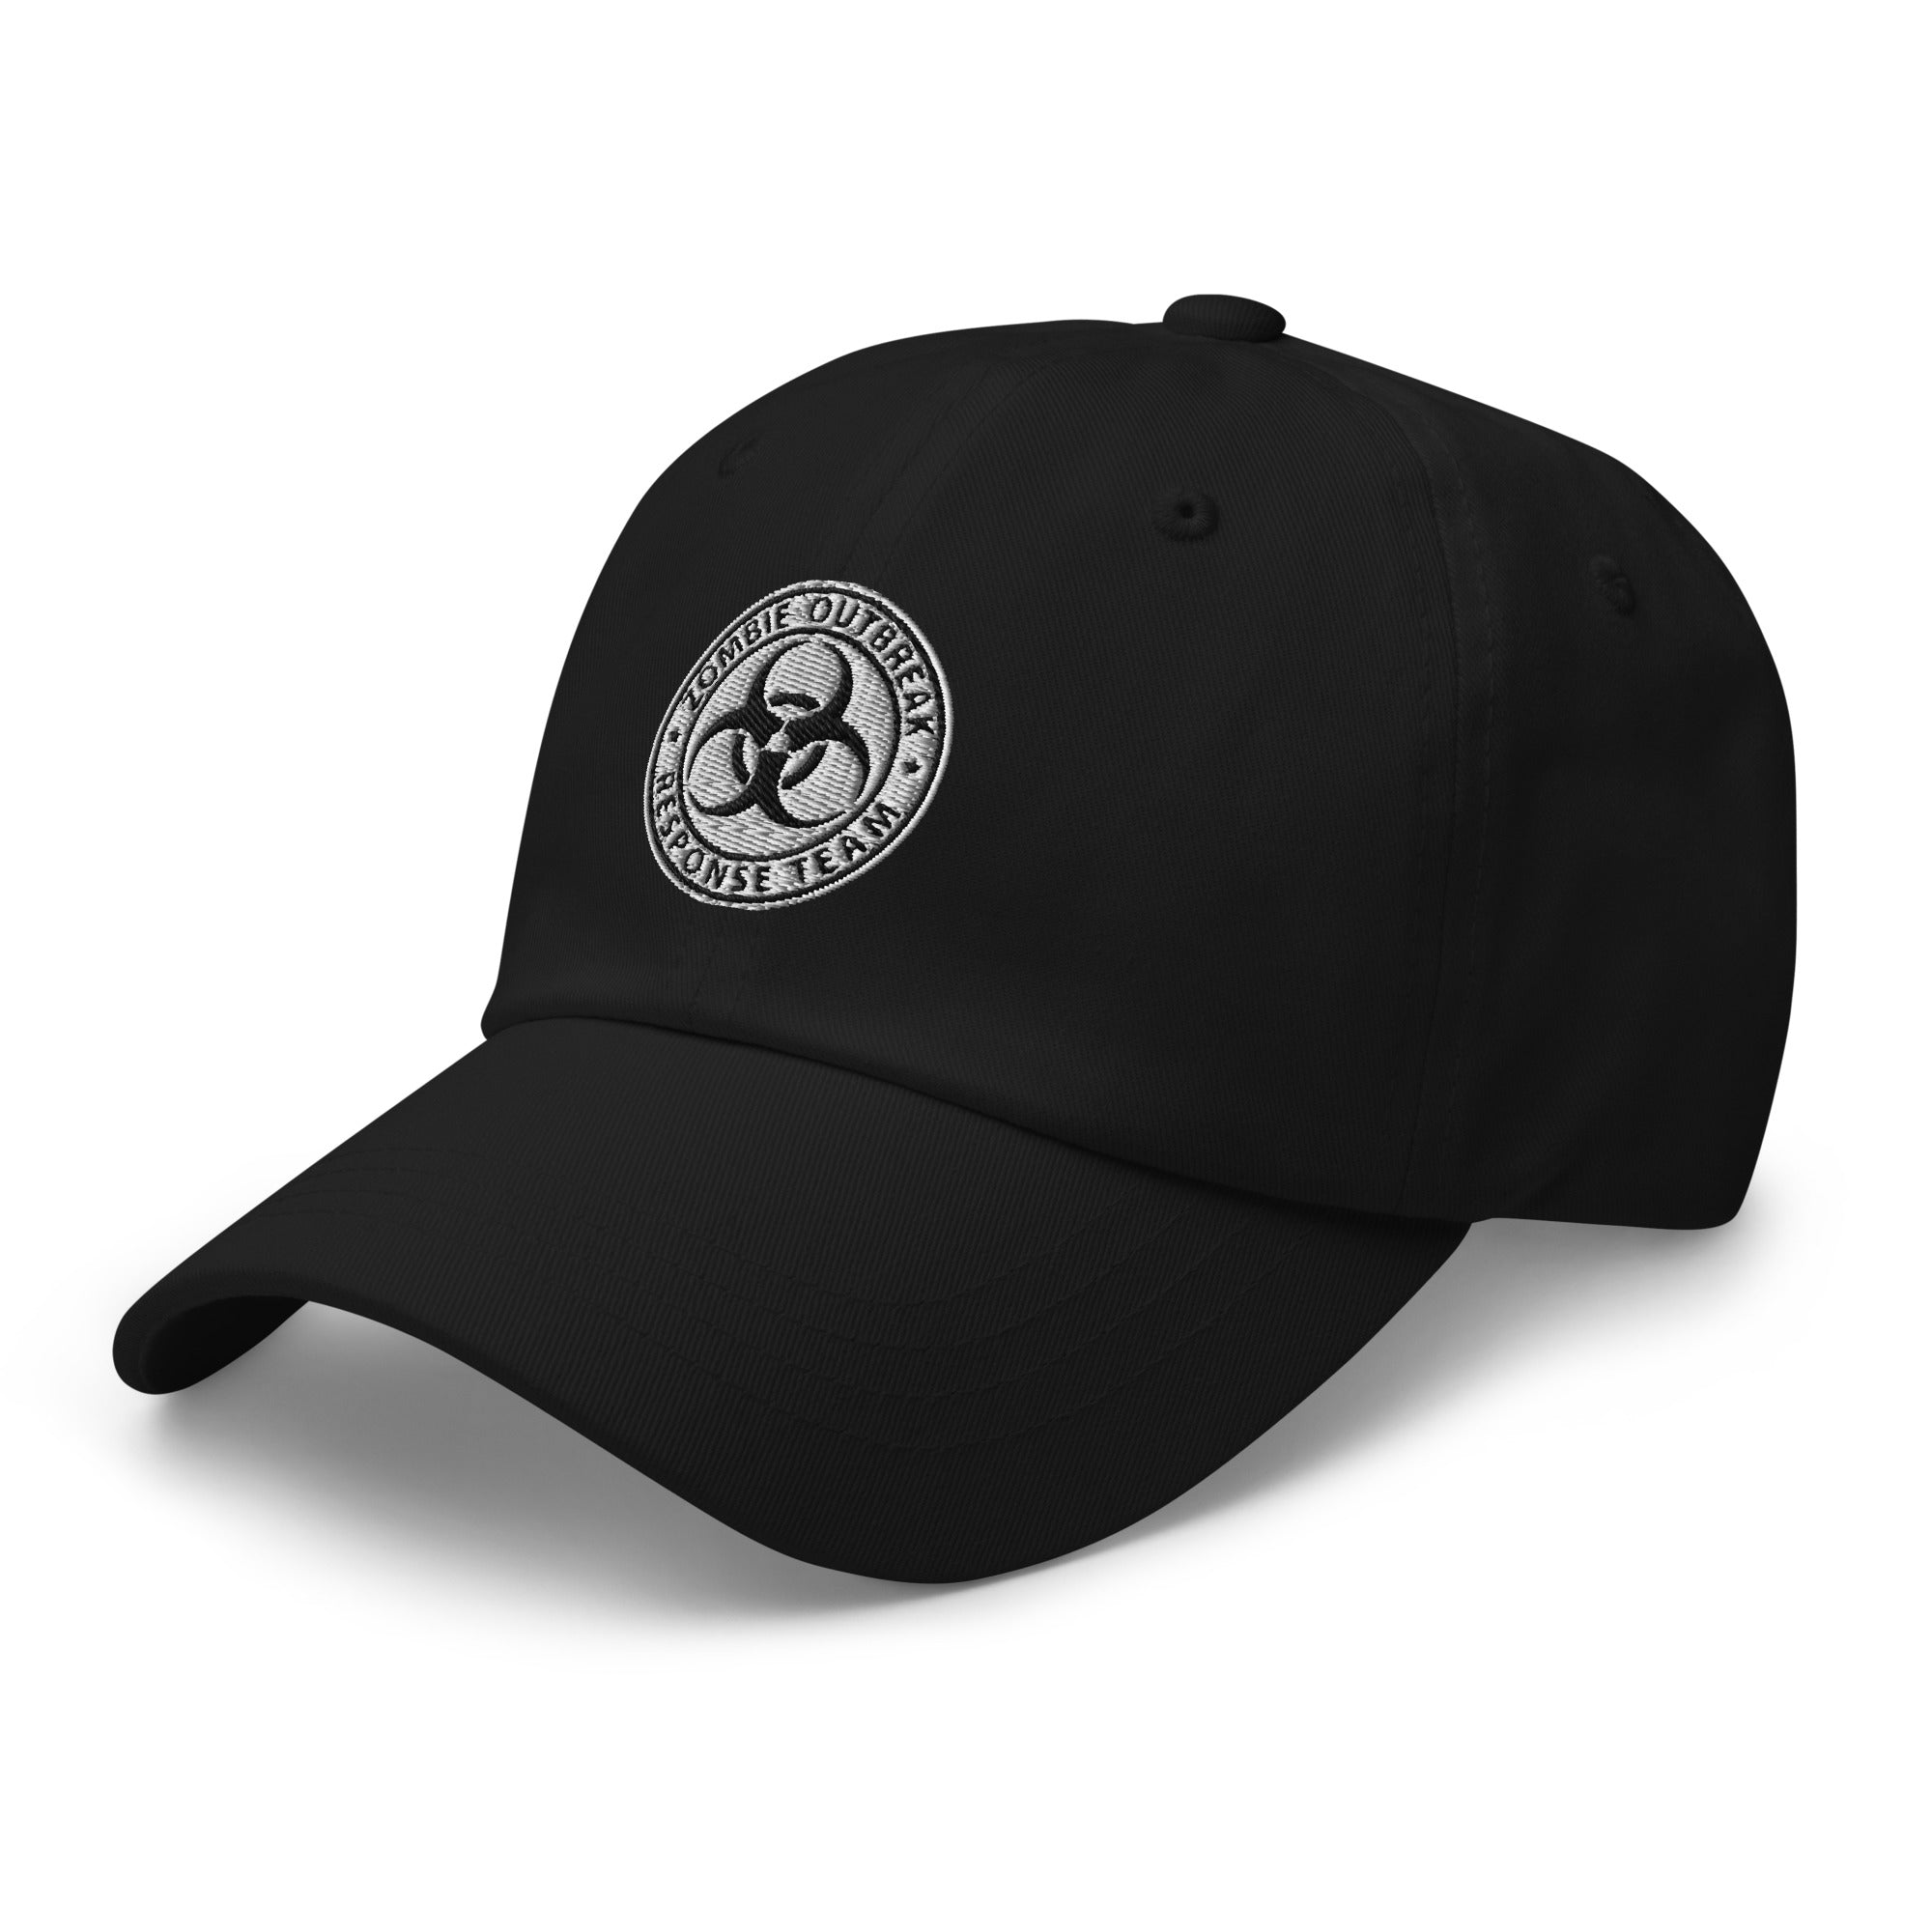 Zombie Outbreak Response Team Embroidered Baseball Cap Dad hat - Edge of Life Designs